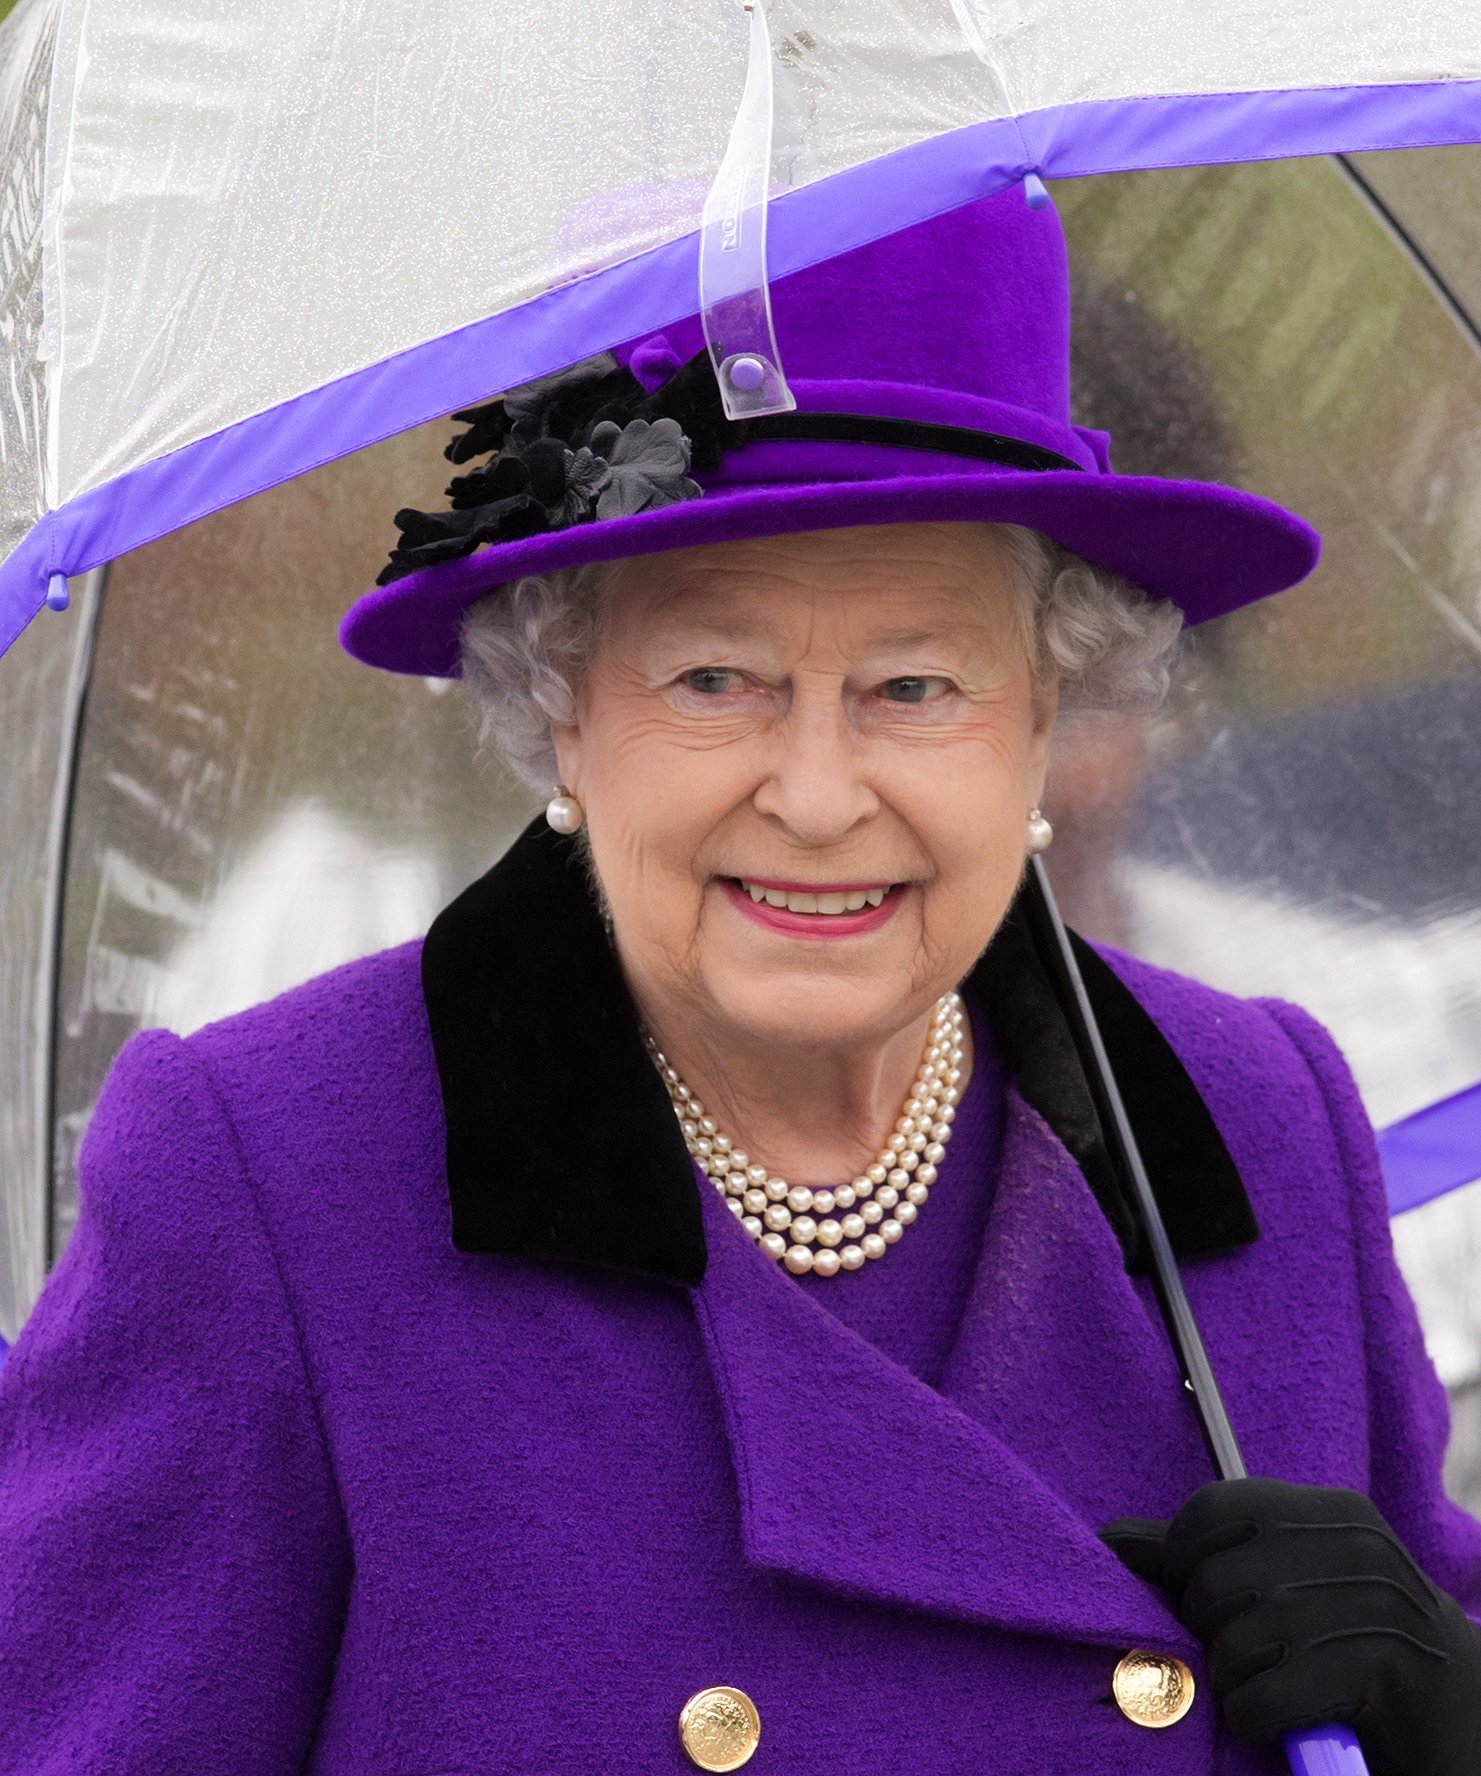  Queen Elizabeth II shelters under an umbrella as attends the opening of the newly developed Jubilee Gardens on October 25, 2012, in London, England. | Source: Getty Images.